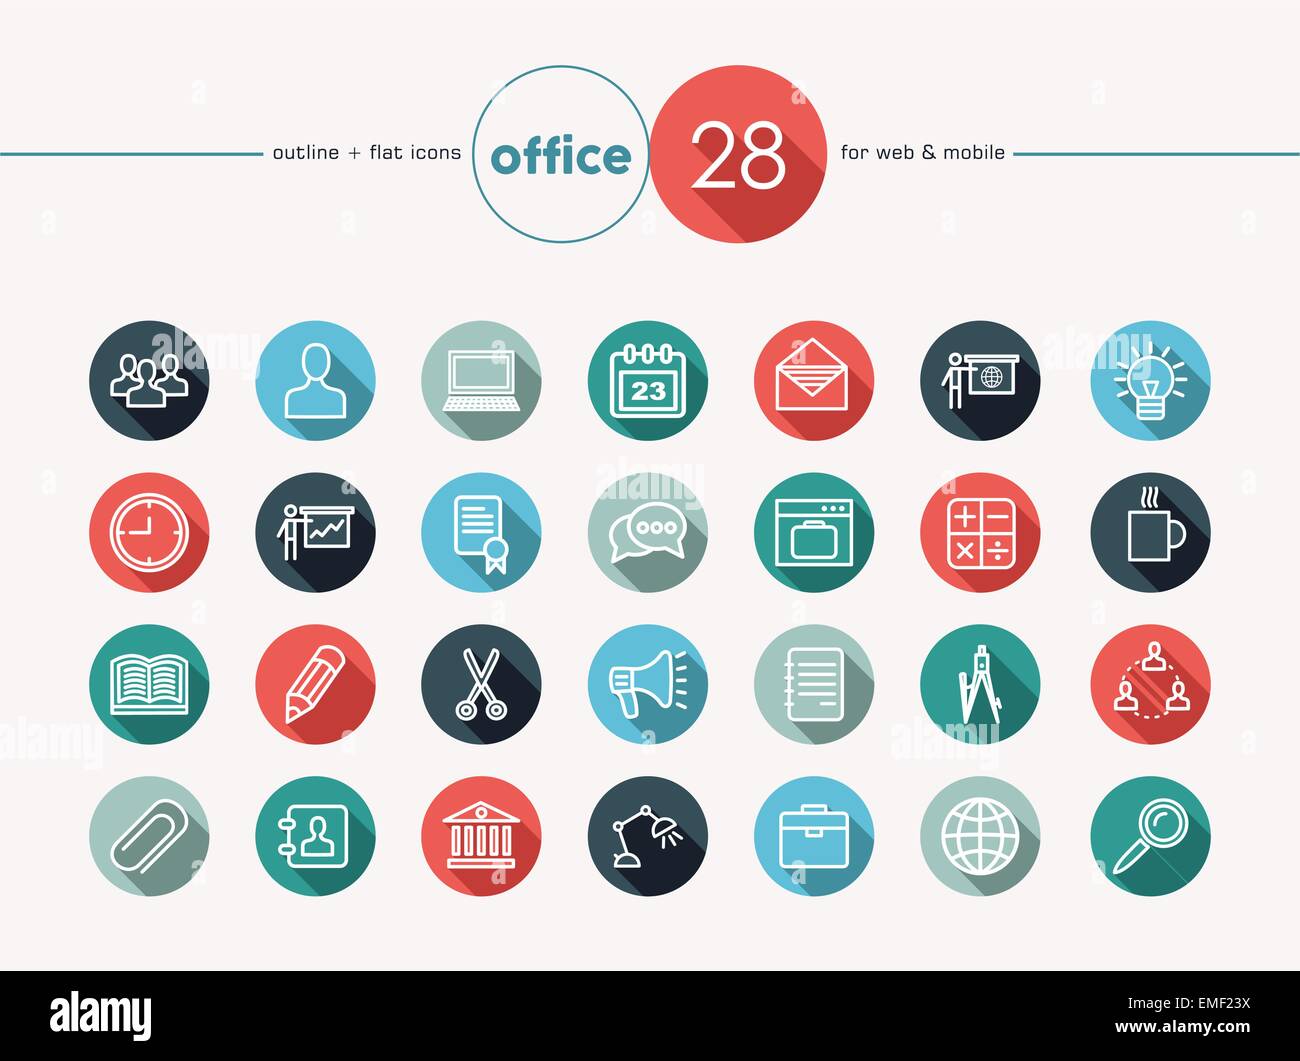 Office flat icons set Stock Vector